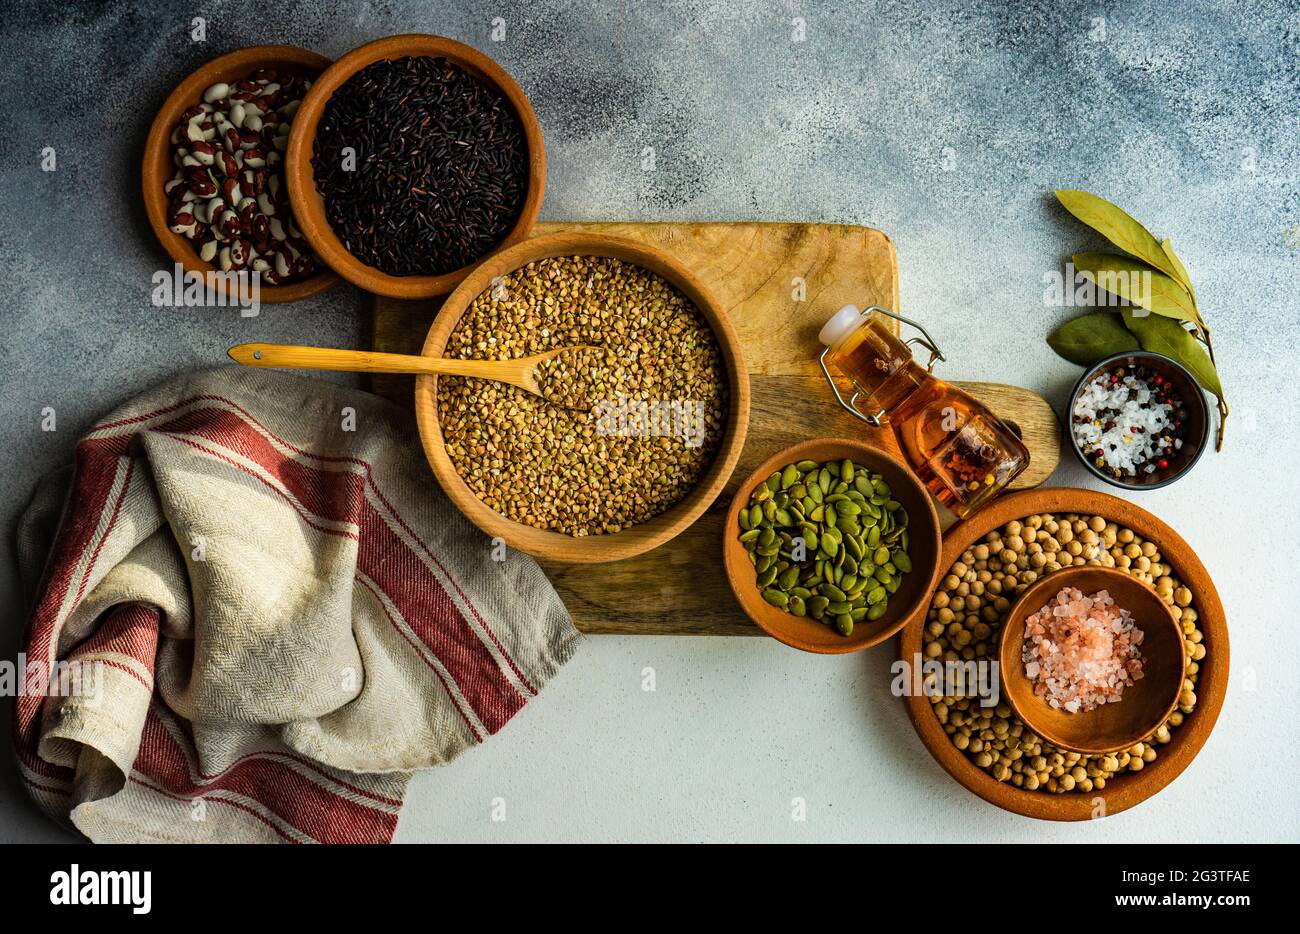 Raw ingredients for cooking healthy food Stock Photo